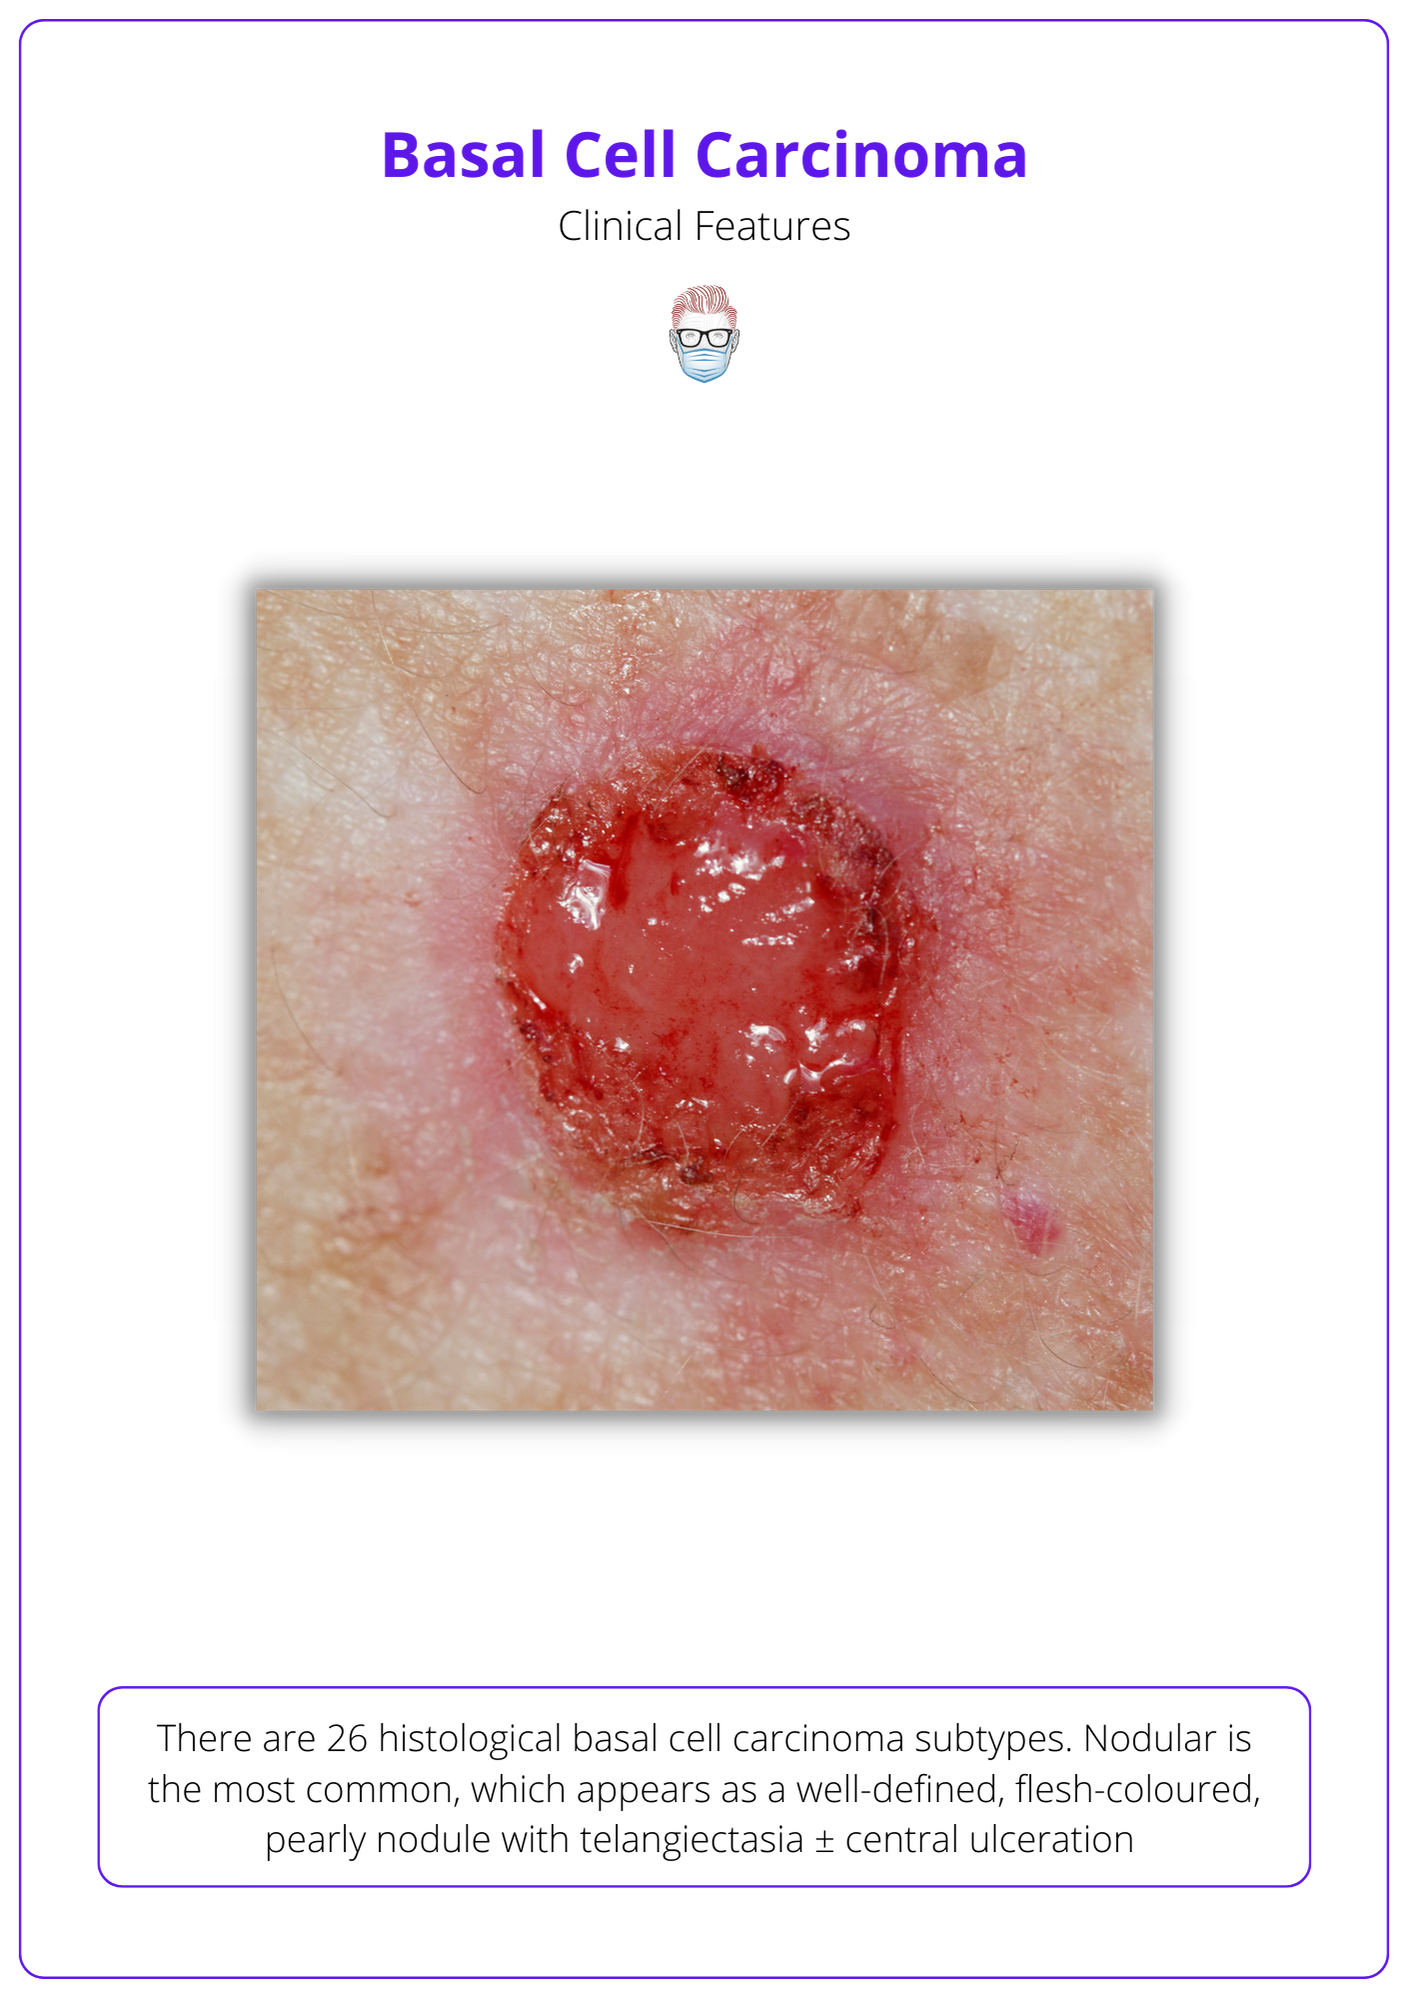 superficial basal cell carcinoma